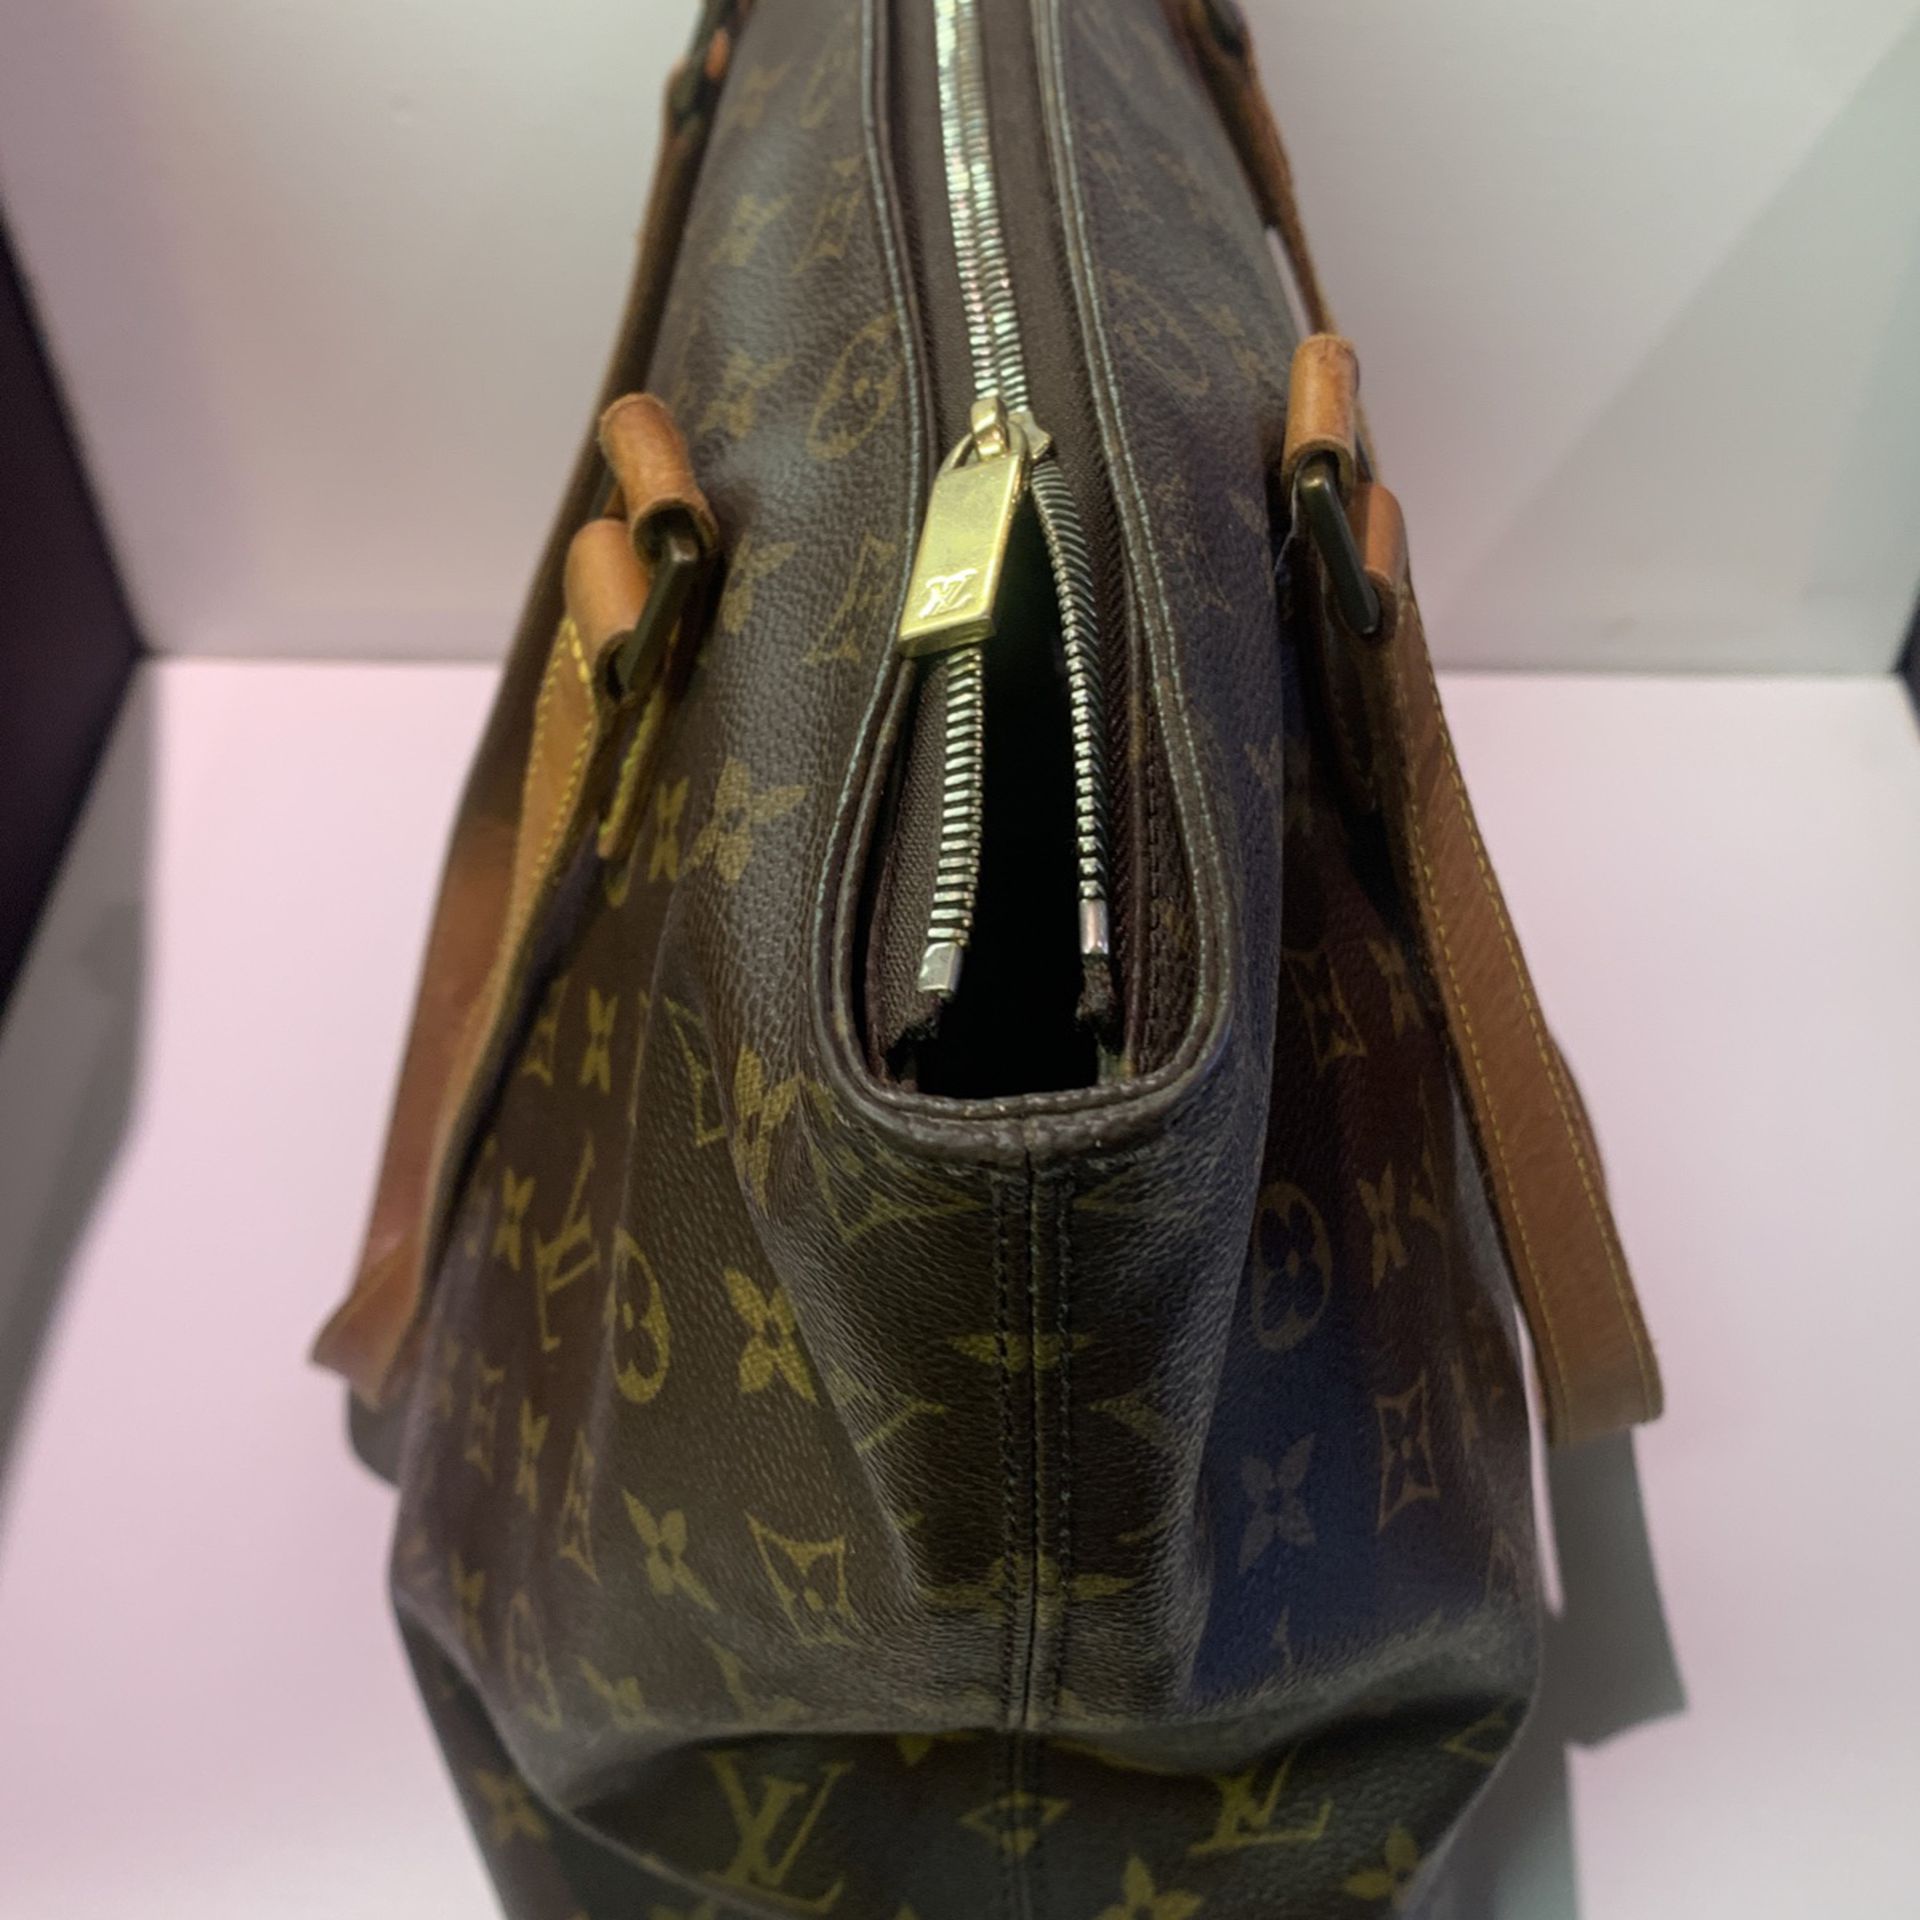 Louis Vuitton Hand Bag for Sale in Old Saybrook, CT - OfferUp